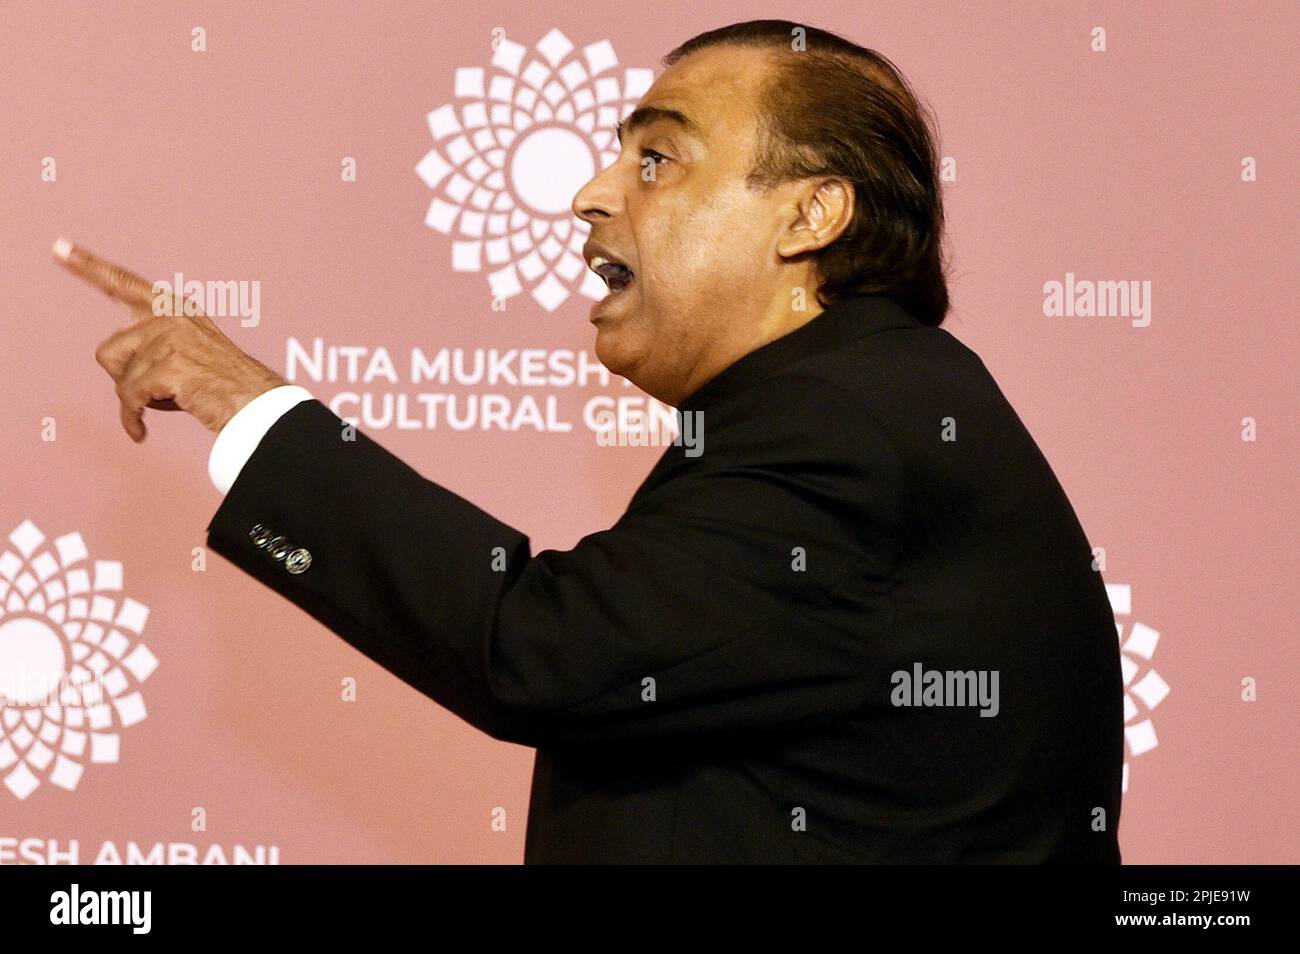 Indian billionaire businessman Mukesh Ambani reacts on the red carpet for a photograph on the second day of the openings of Nita Mukesh Ambani Cultural Centre in Mumbai, India, 01 April, 2023. (Photo by Indranil Aditya/NurPhoto)0 Credit: NurPhoto SRL/Alamy Live News Stock Photo